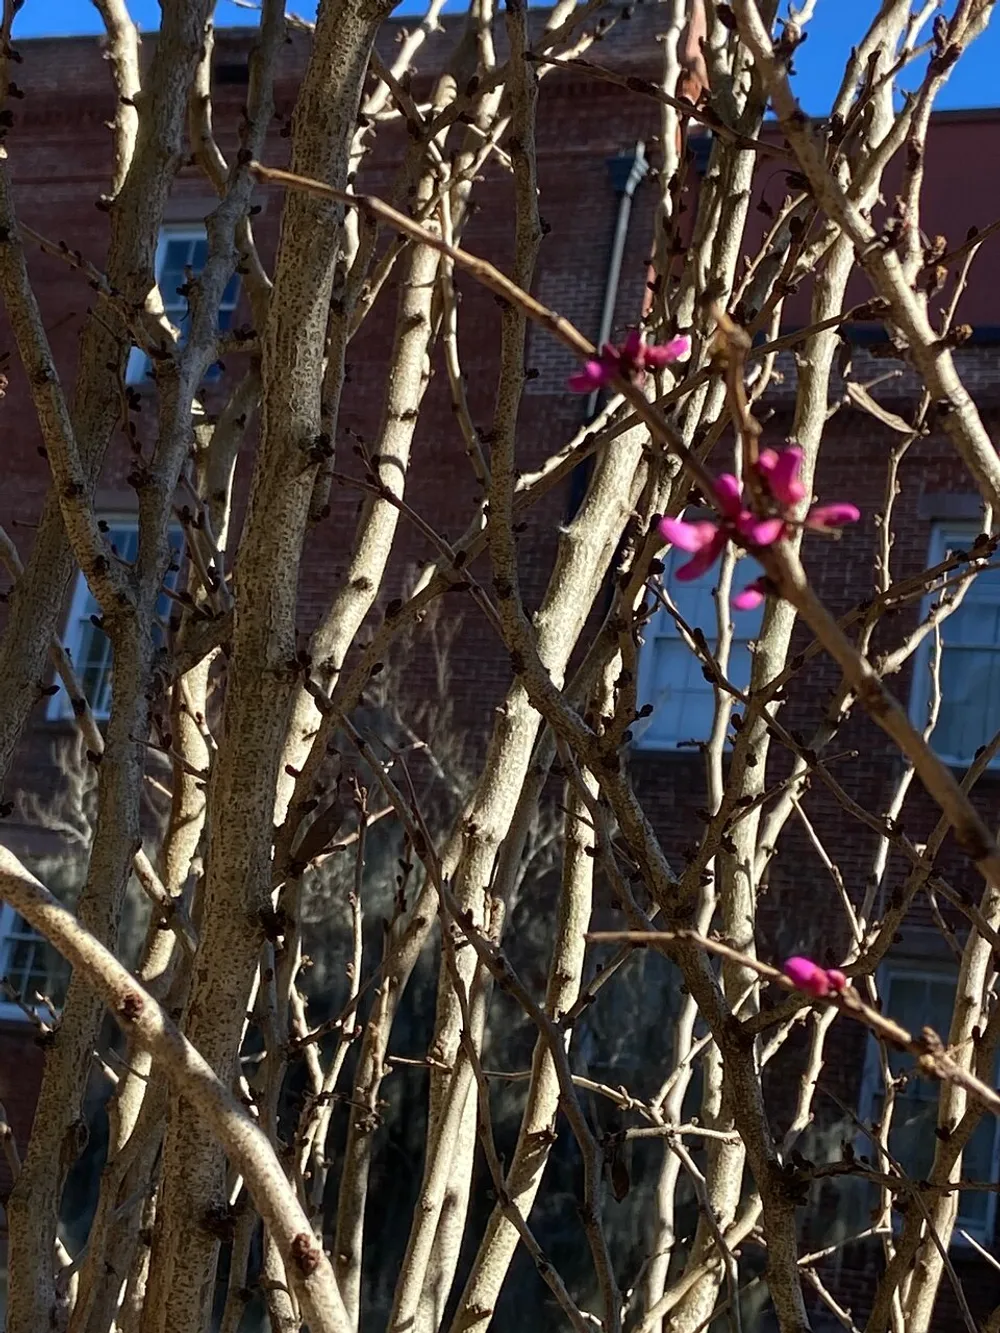 The image captures the intertwining branches of a leafless shrub with a sprinkling of pink buds set against the backdrop of a brick building under a clear blue sky